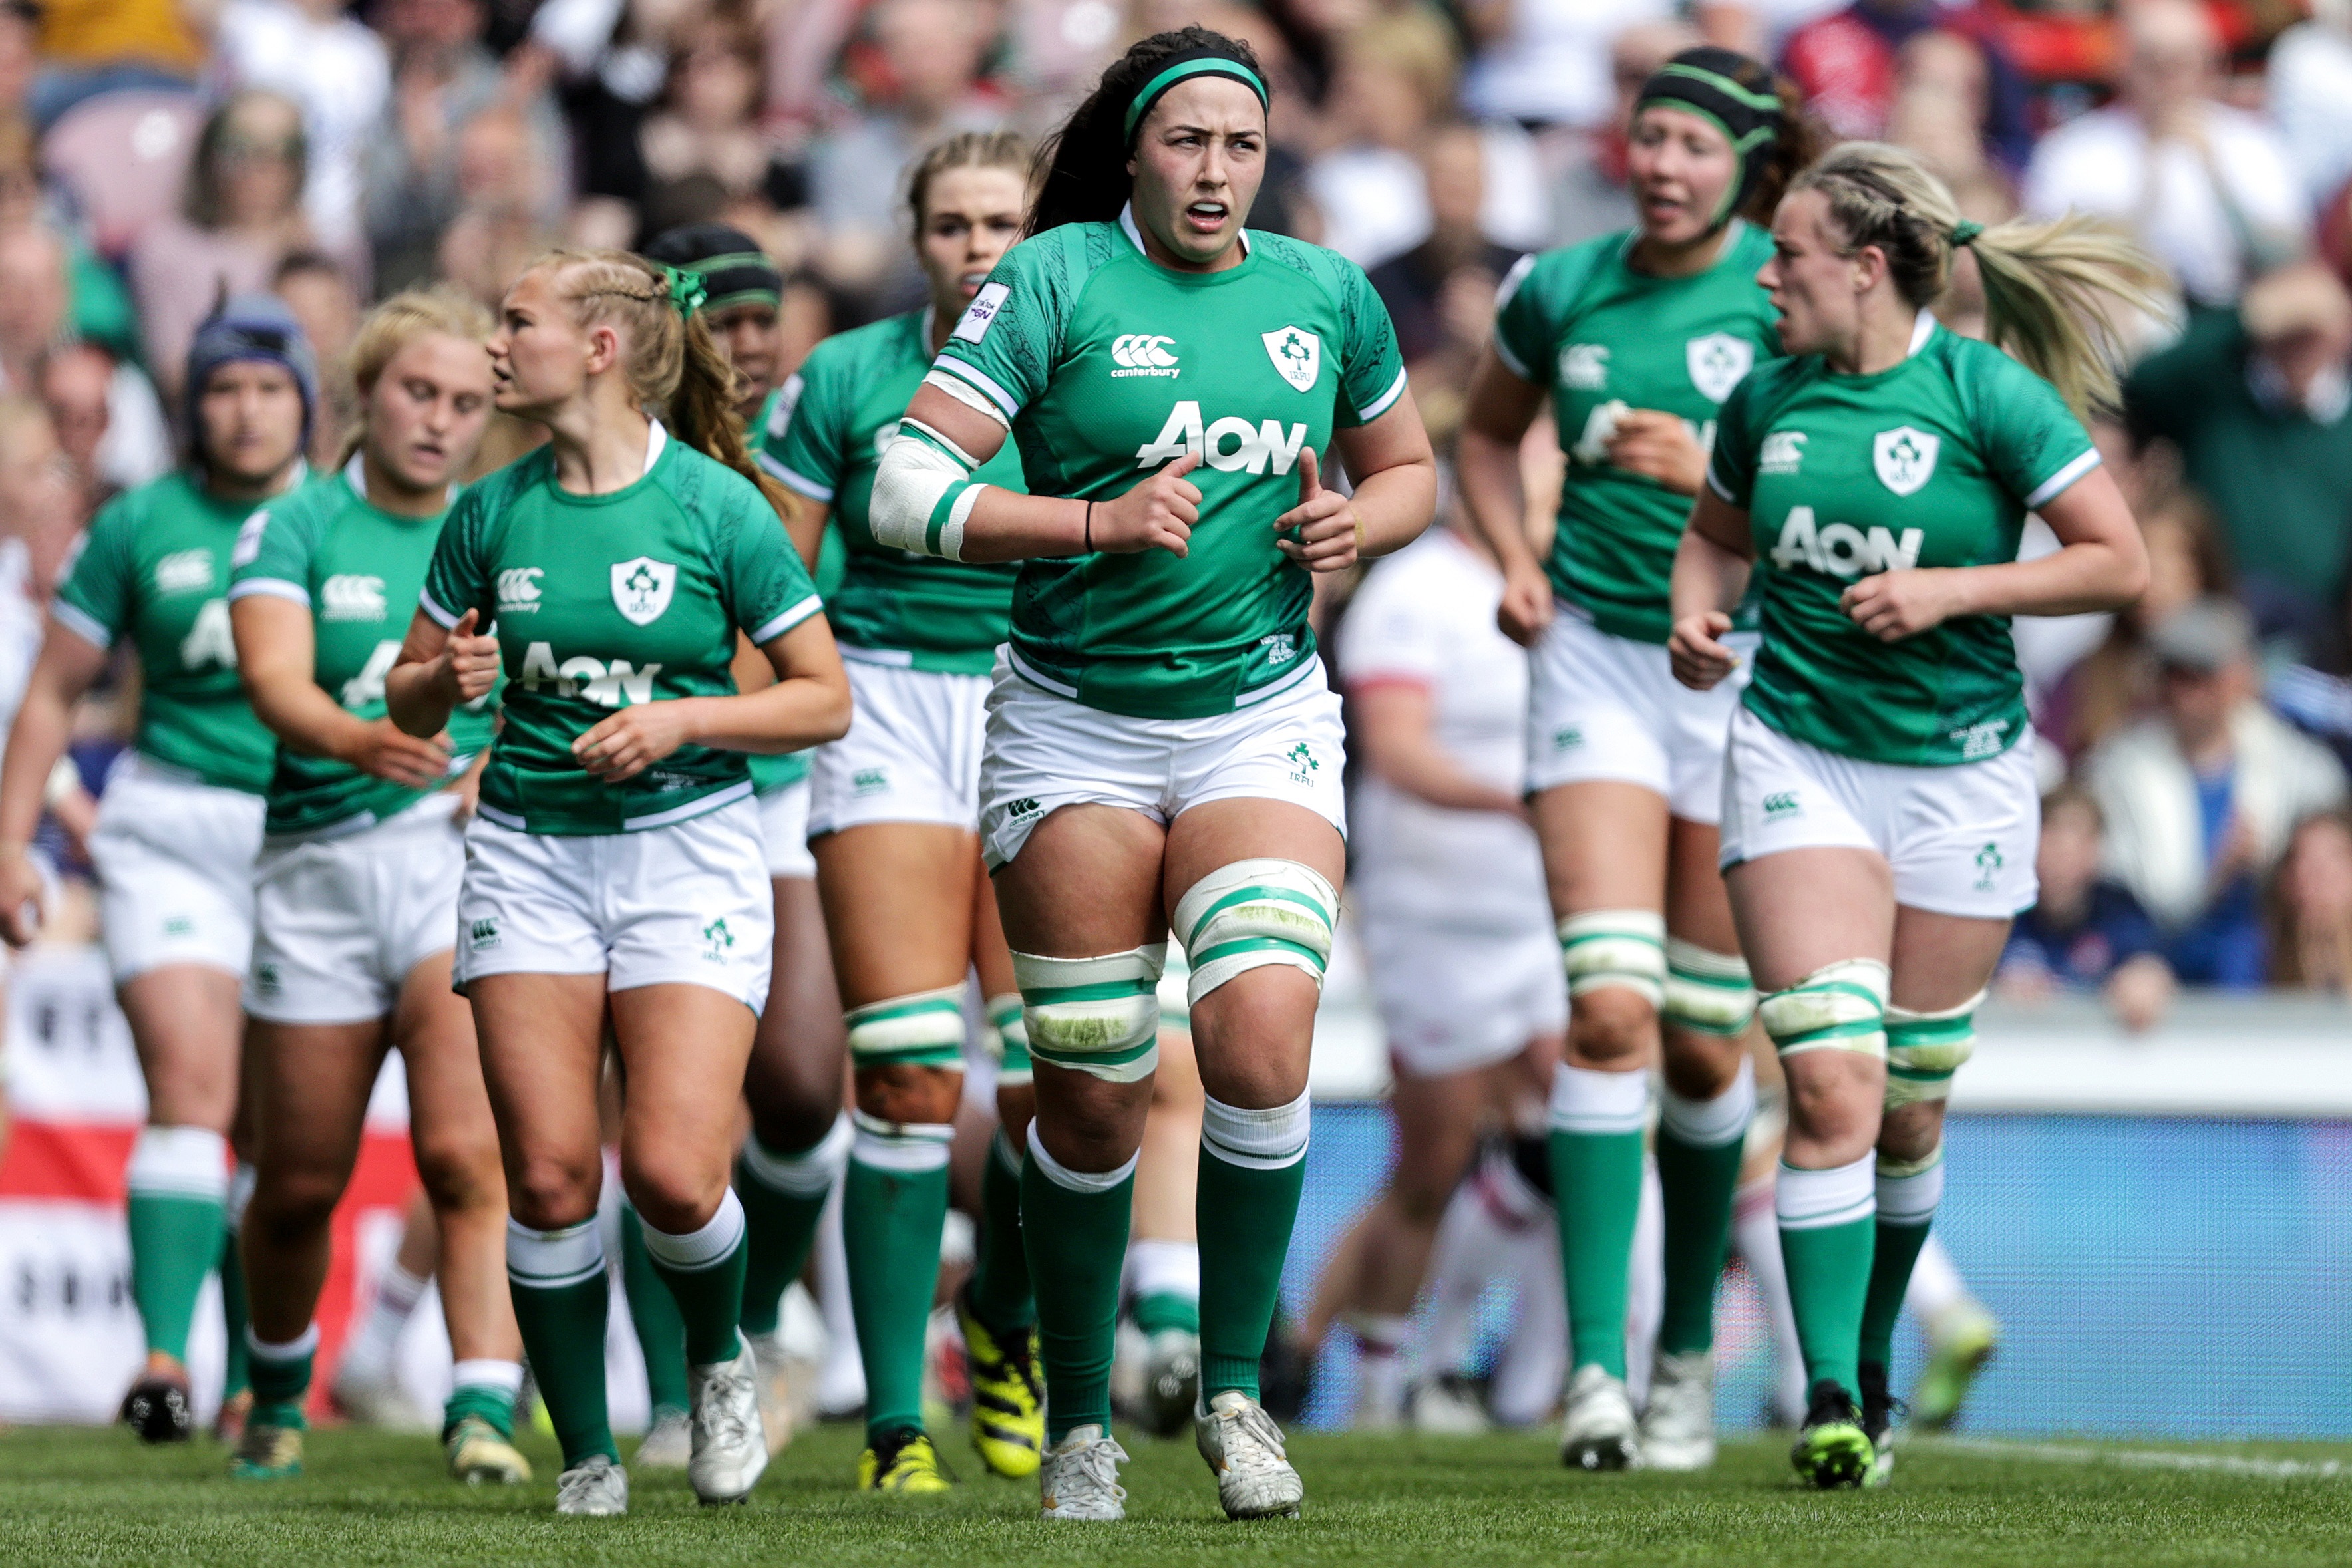 TG4 to broadcast Ireland womens rugby teams Test series against Japan